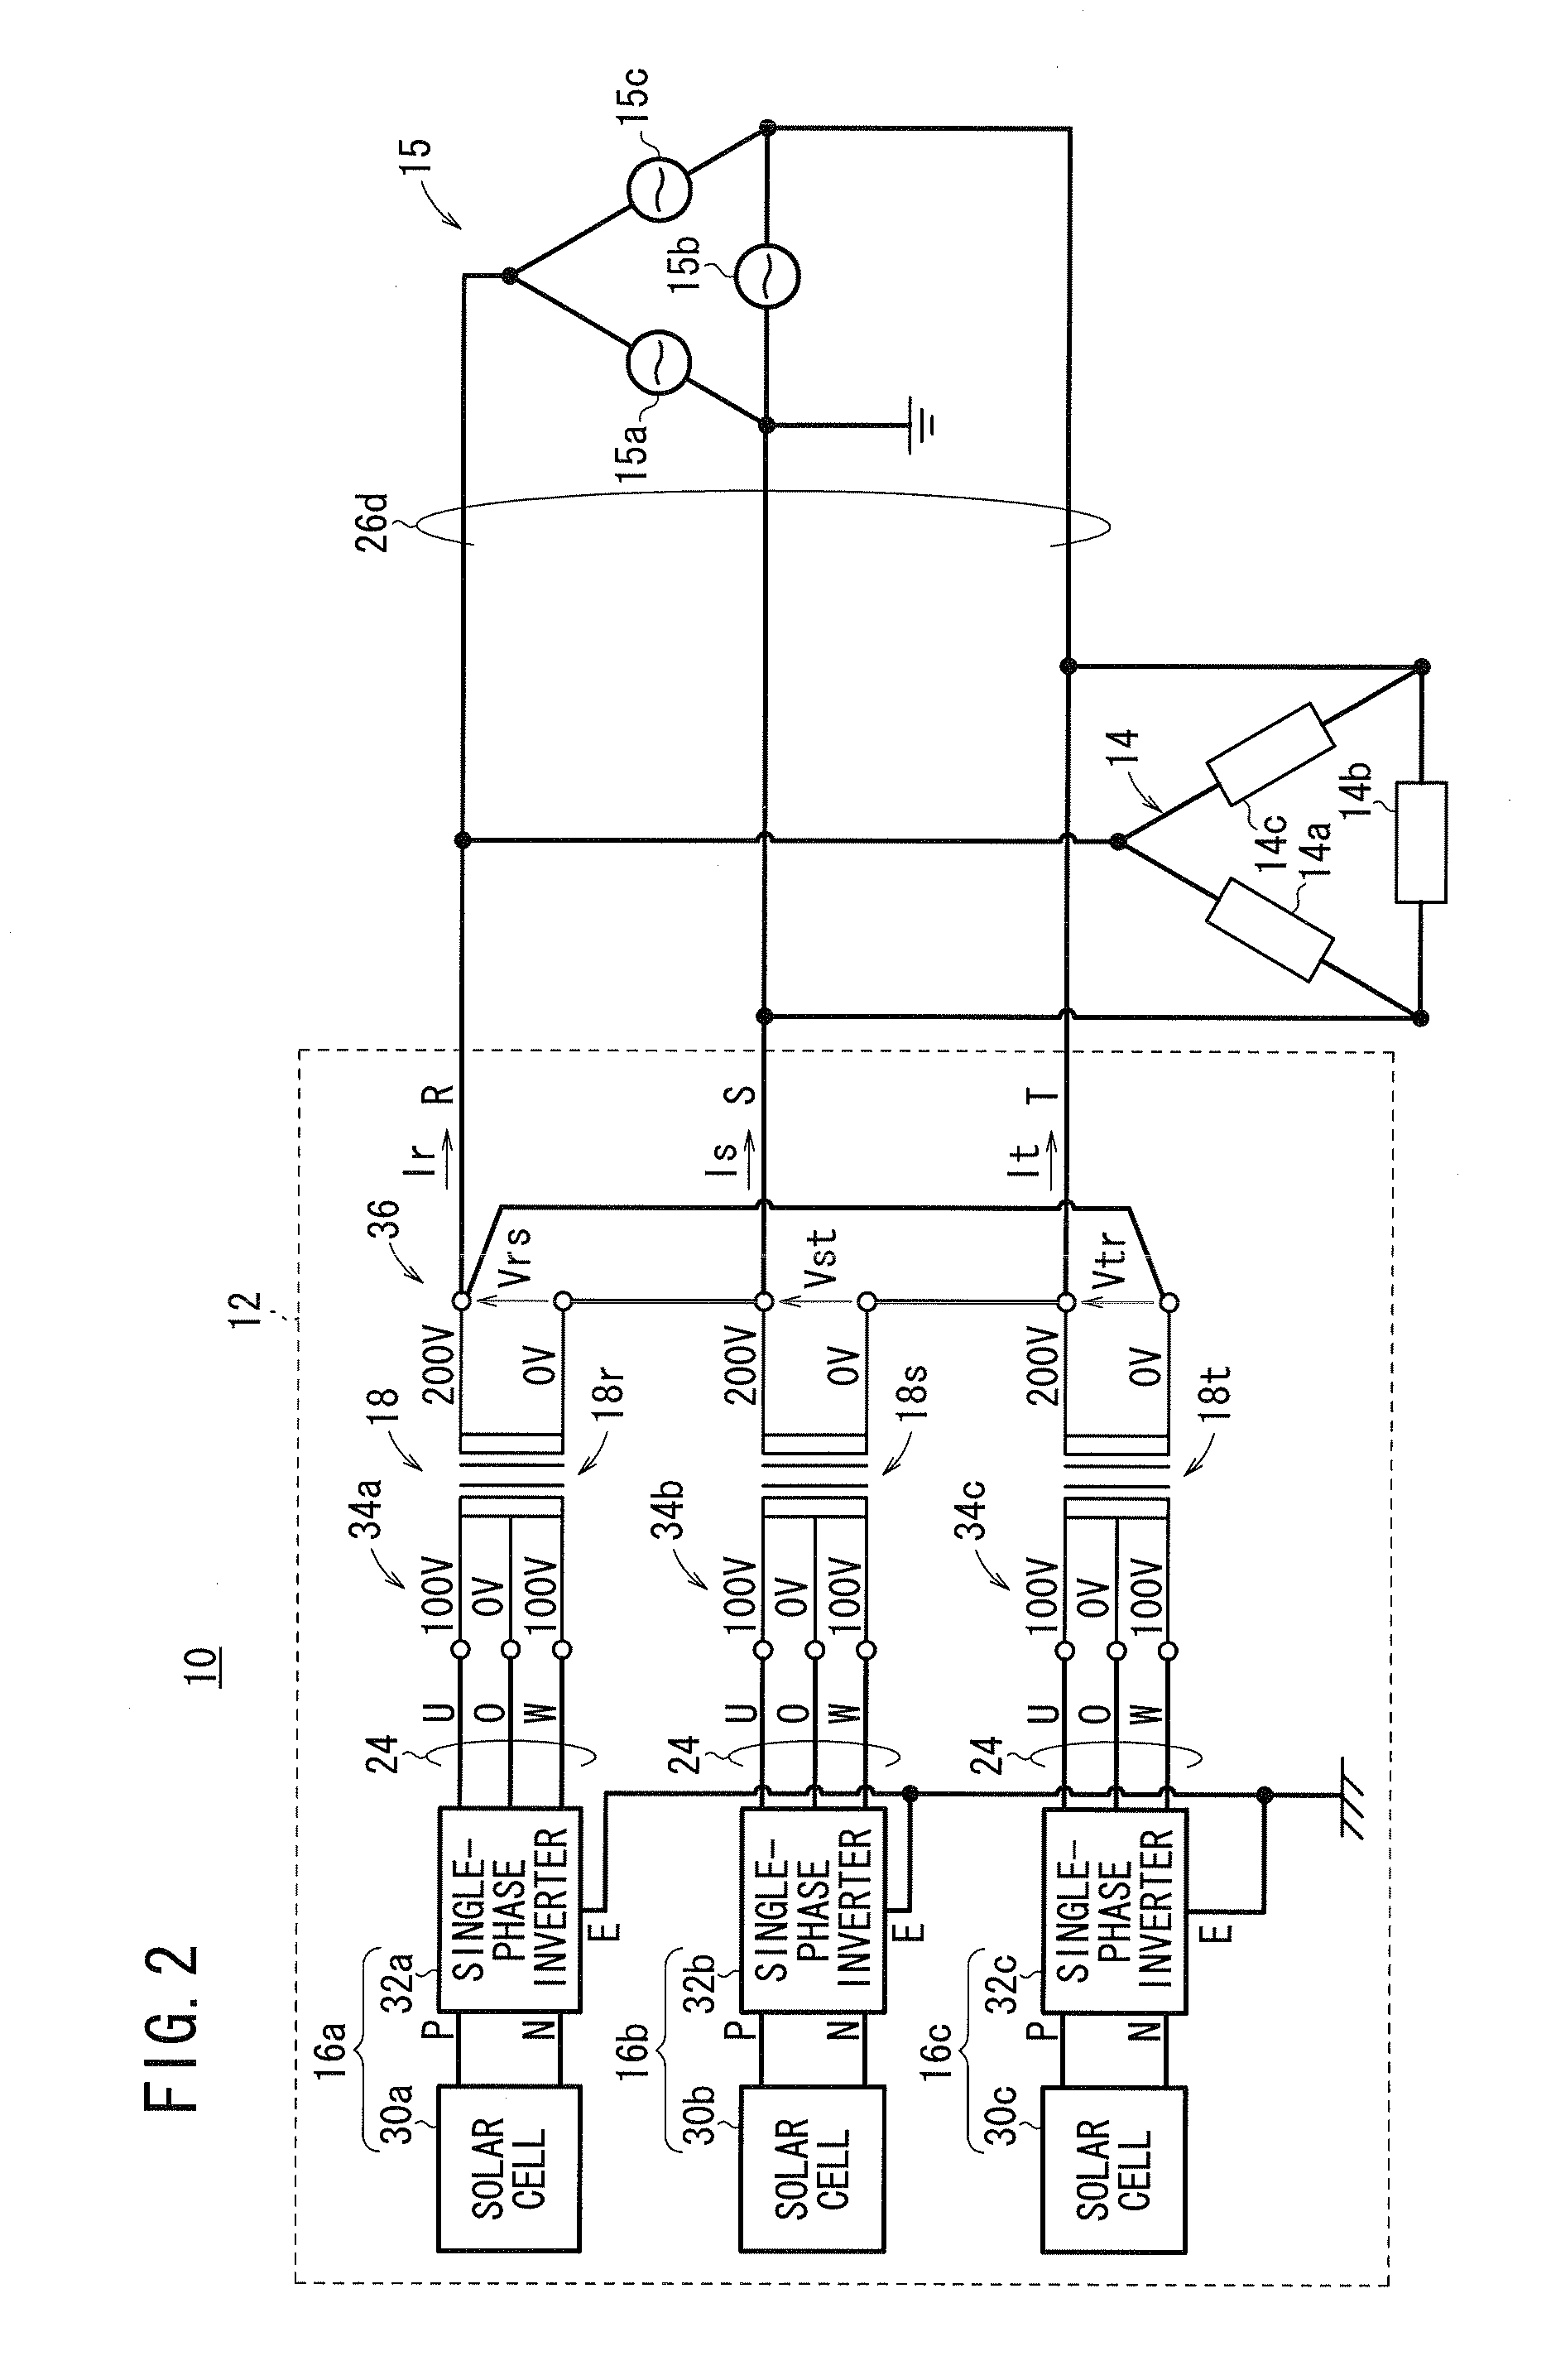 Single-phase to n-phase converter and power conversion system